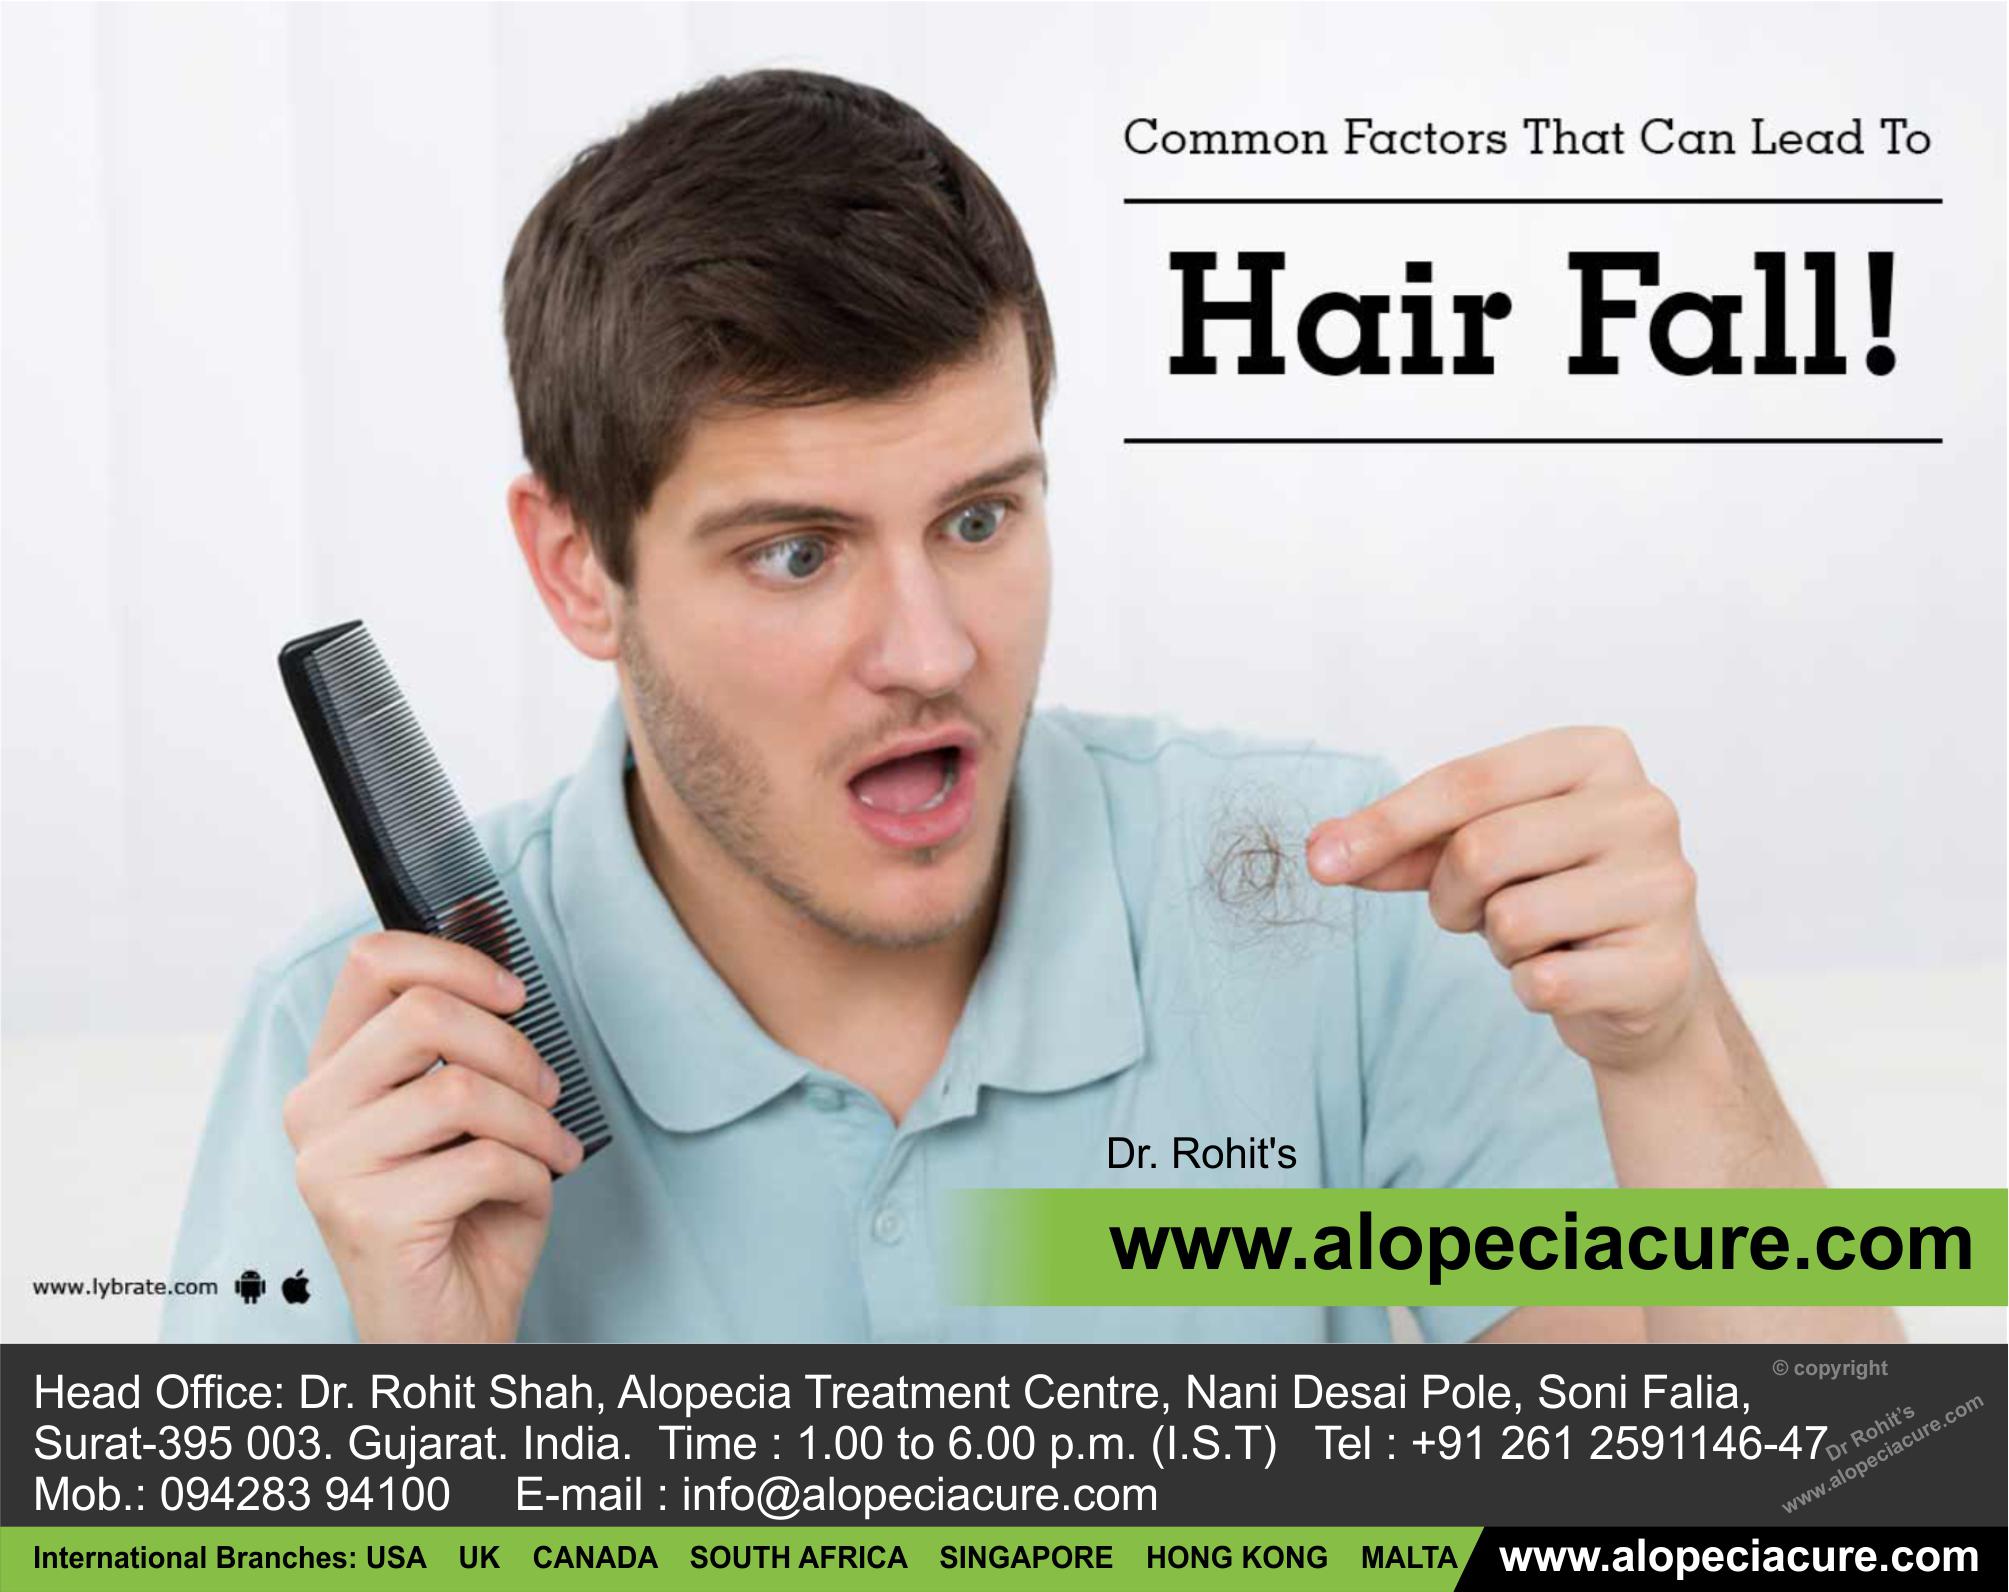 Common Factors That Can Lead To Hair Fall